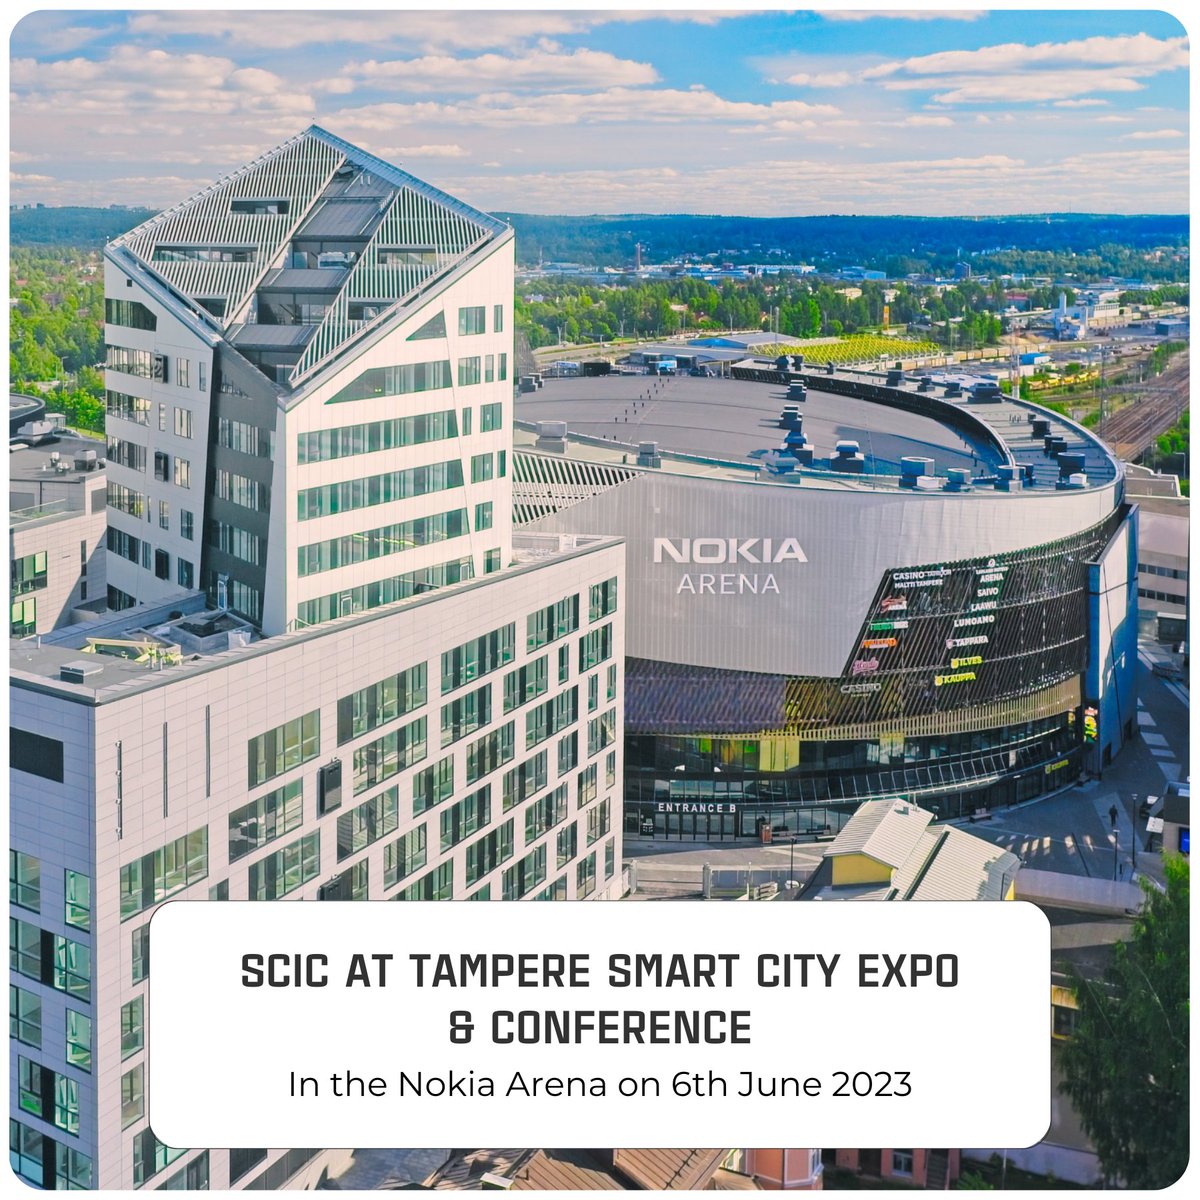 The Tampere Smart City Expo & Conference is just around the corner!

Join us at SCIC's stand to witness the future of #SmartCities in action. This is the perfect opportunity to connect and exchange ideas with other industry experts.

#tscec #nokiaareena #sustainablecity #expo